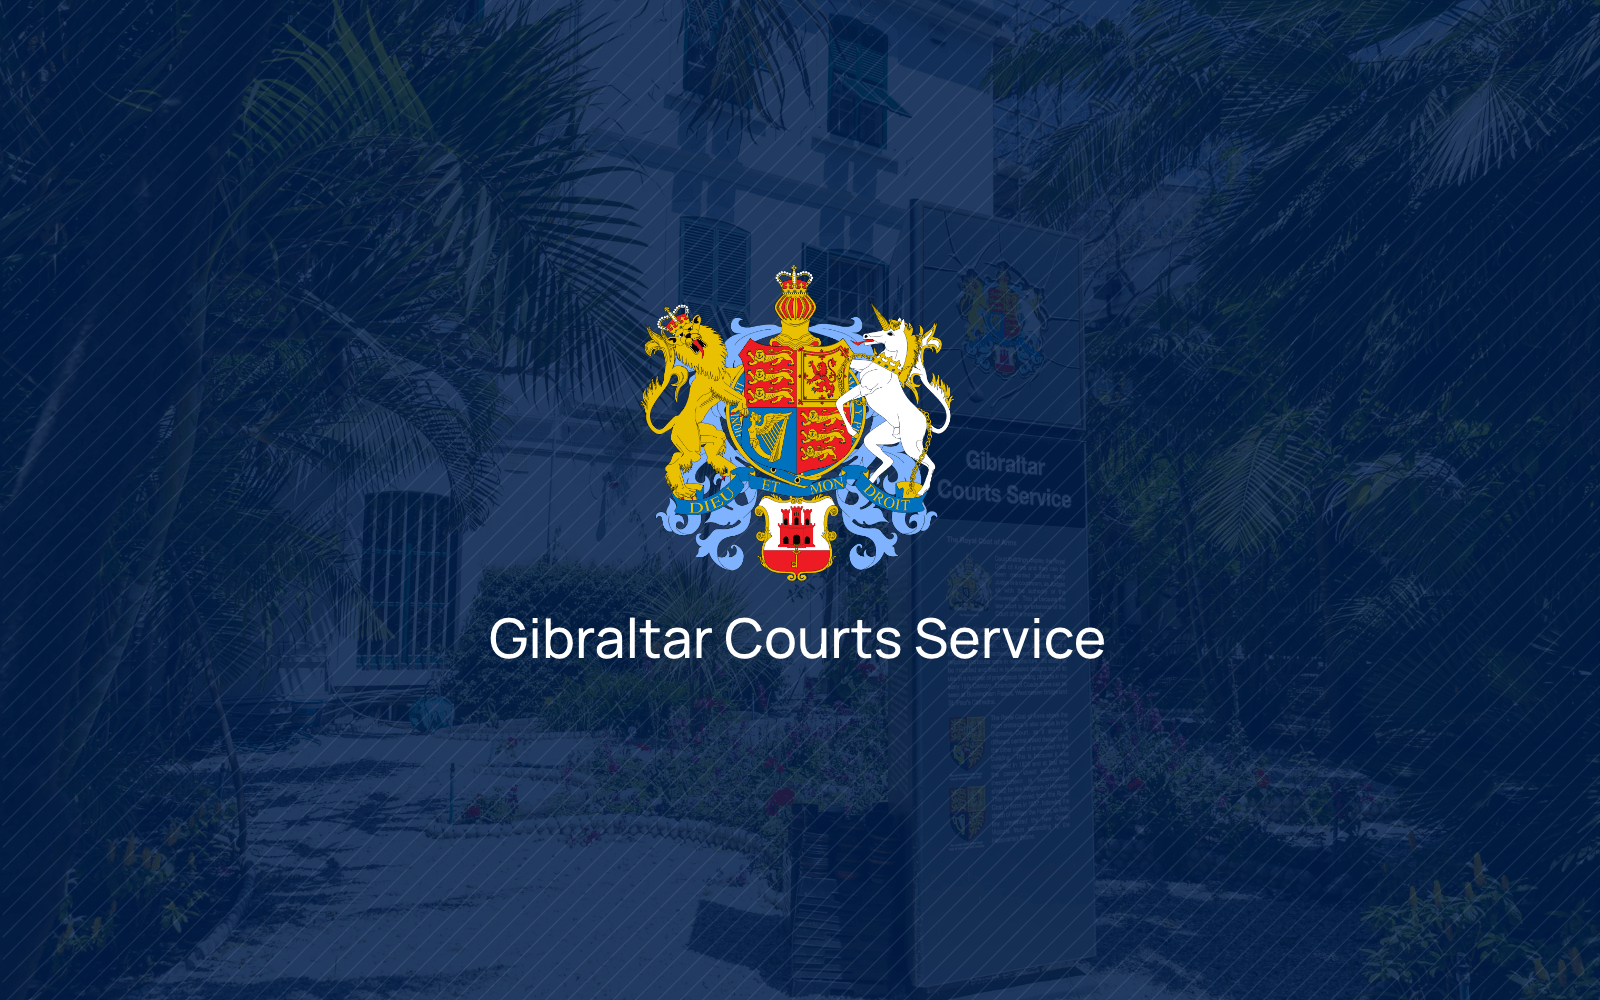 Gibraltar Courts Service Image